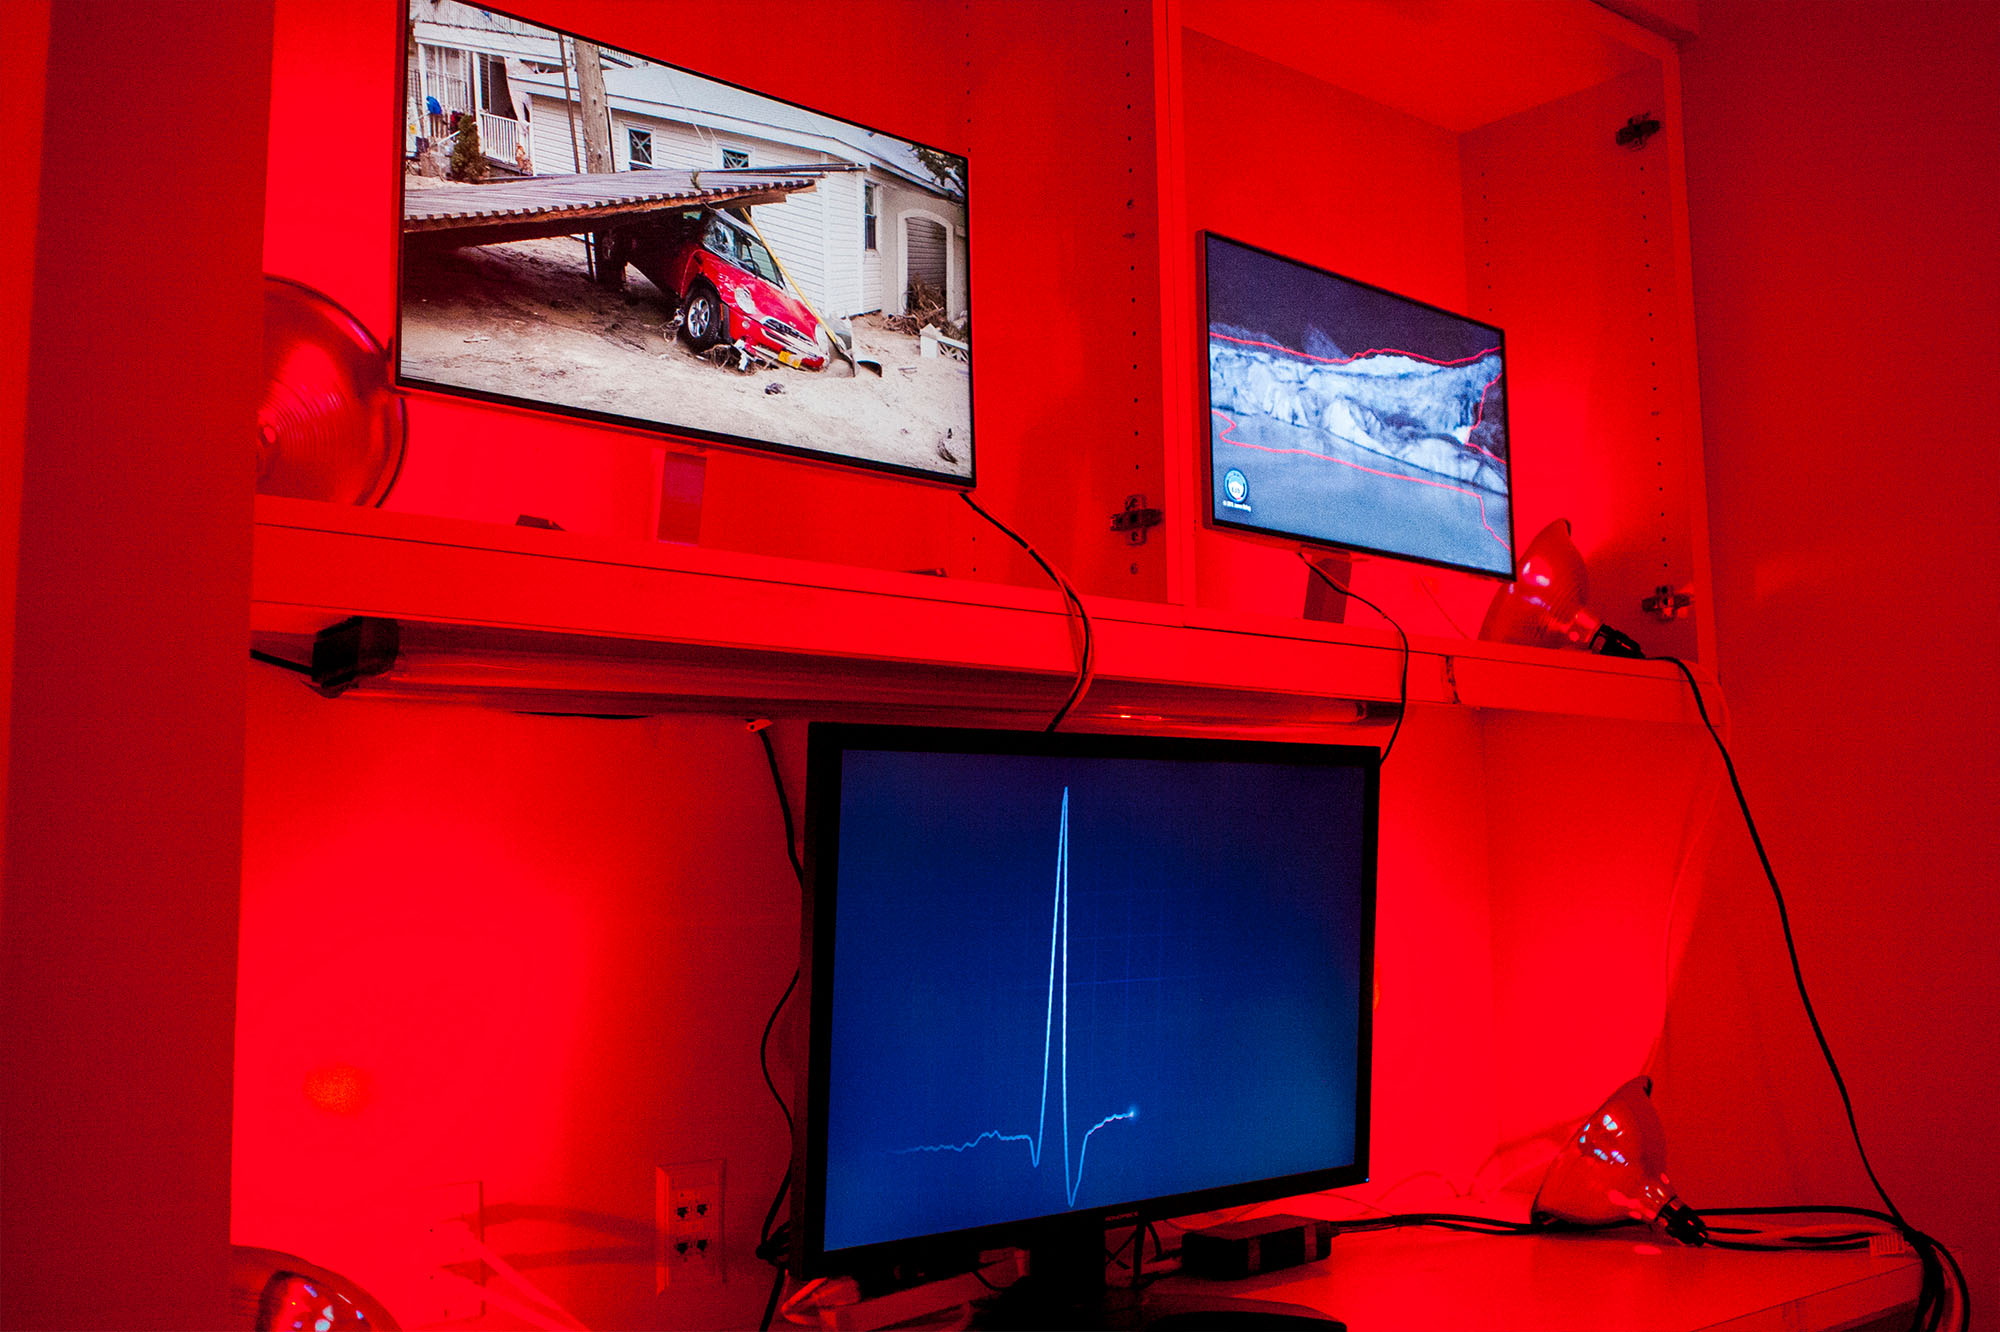 Video screens showing glacial retreat, storms and a heartbeat display in a red lit room